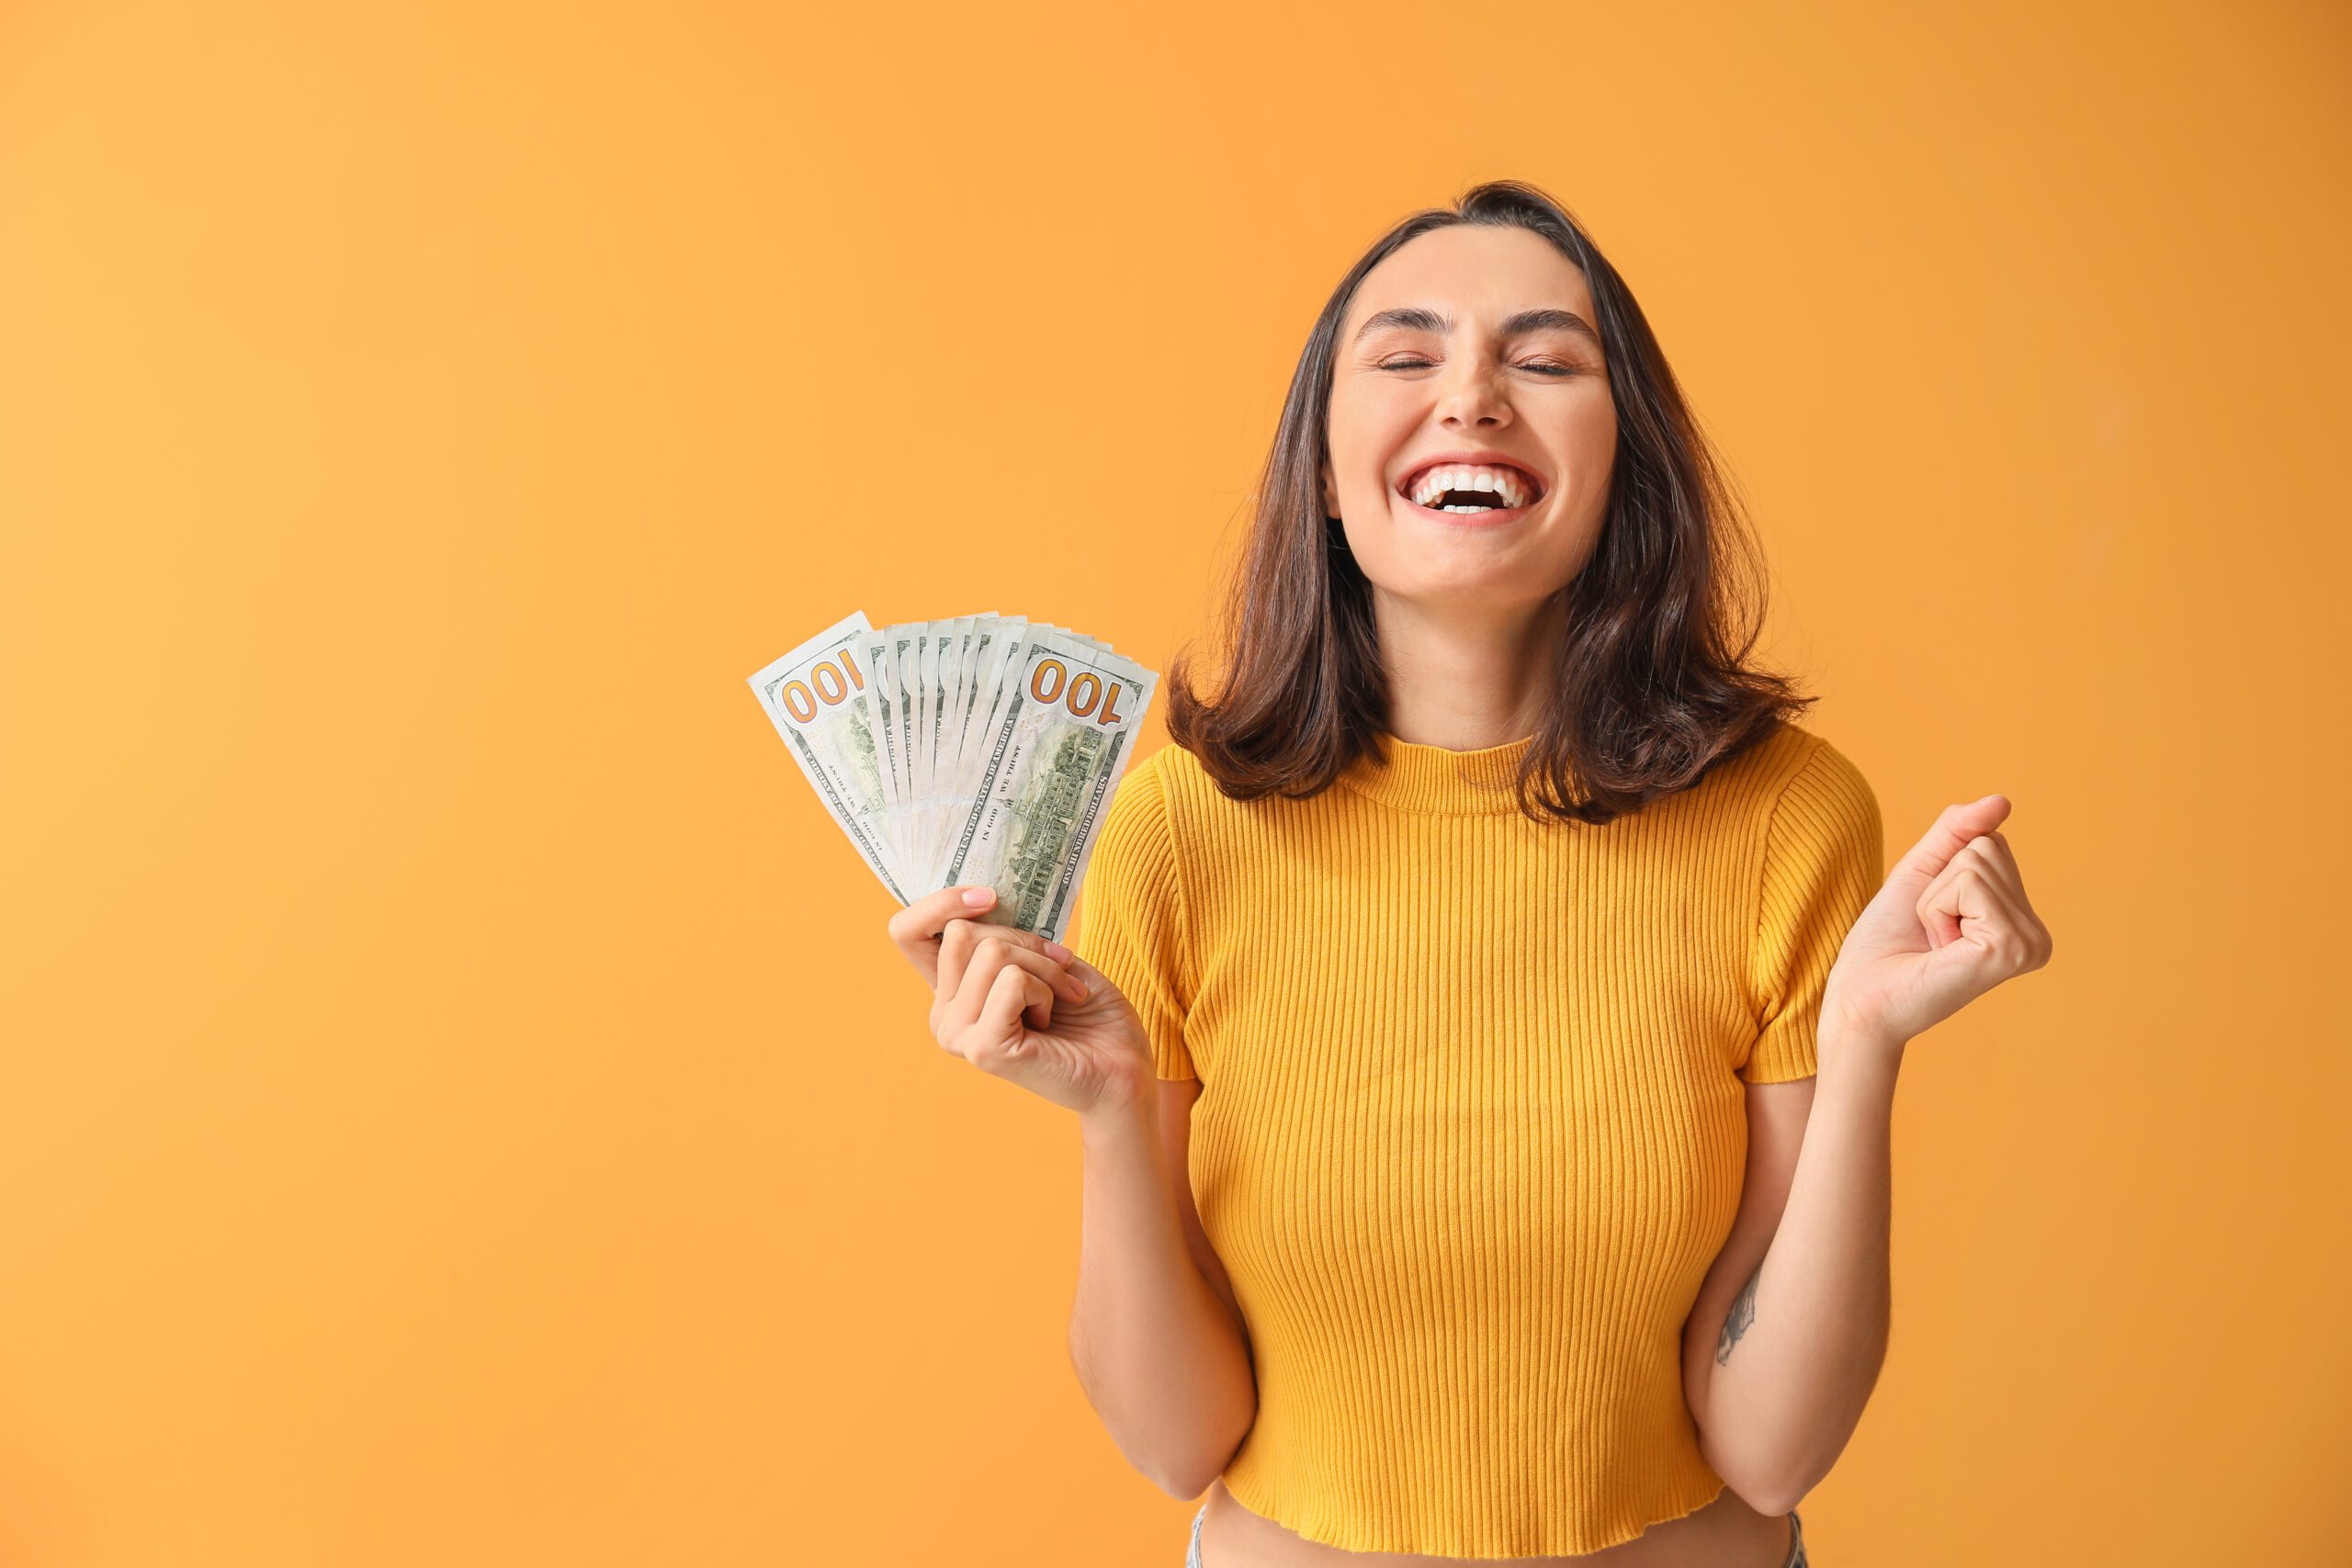 Woman smiling and holding cash in front of an orange wall